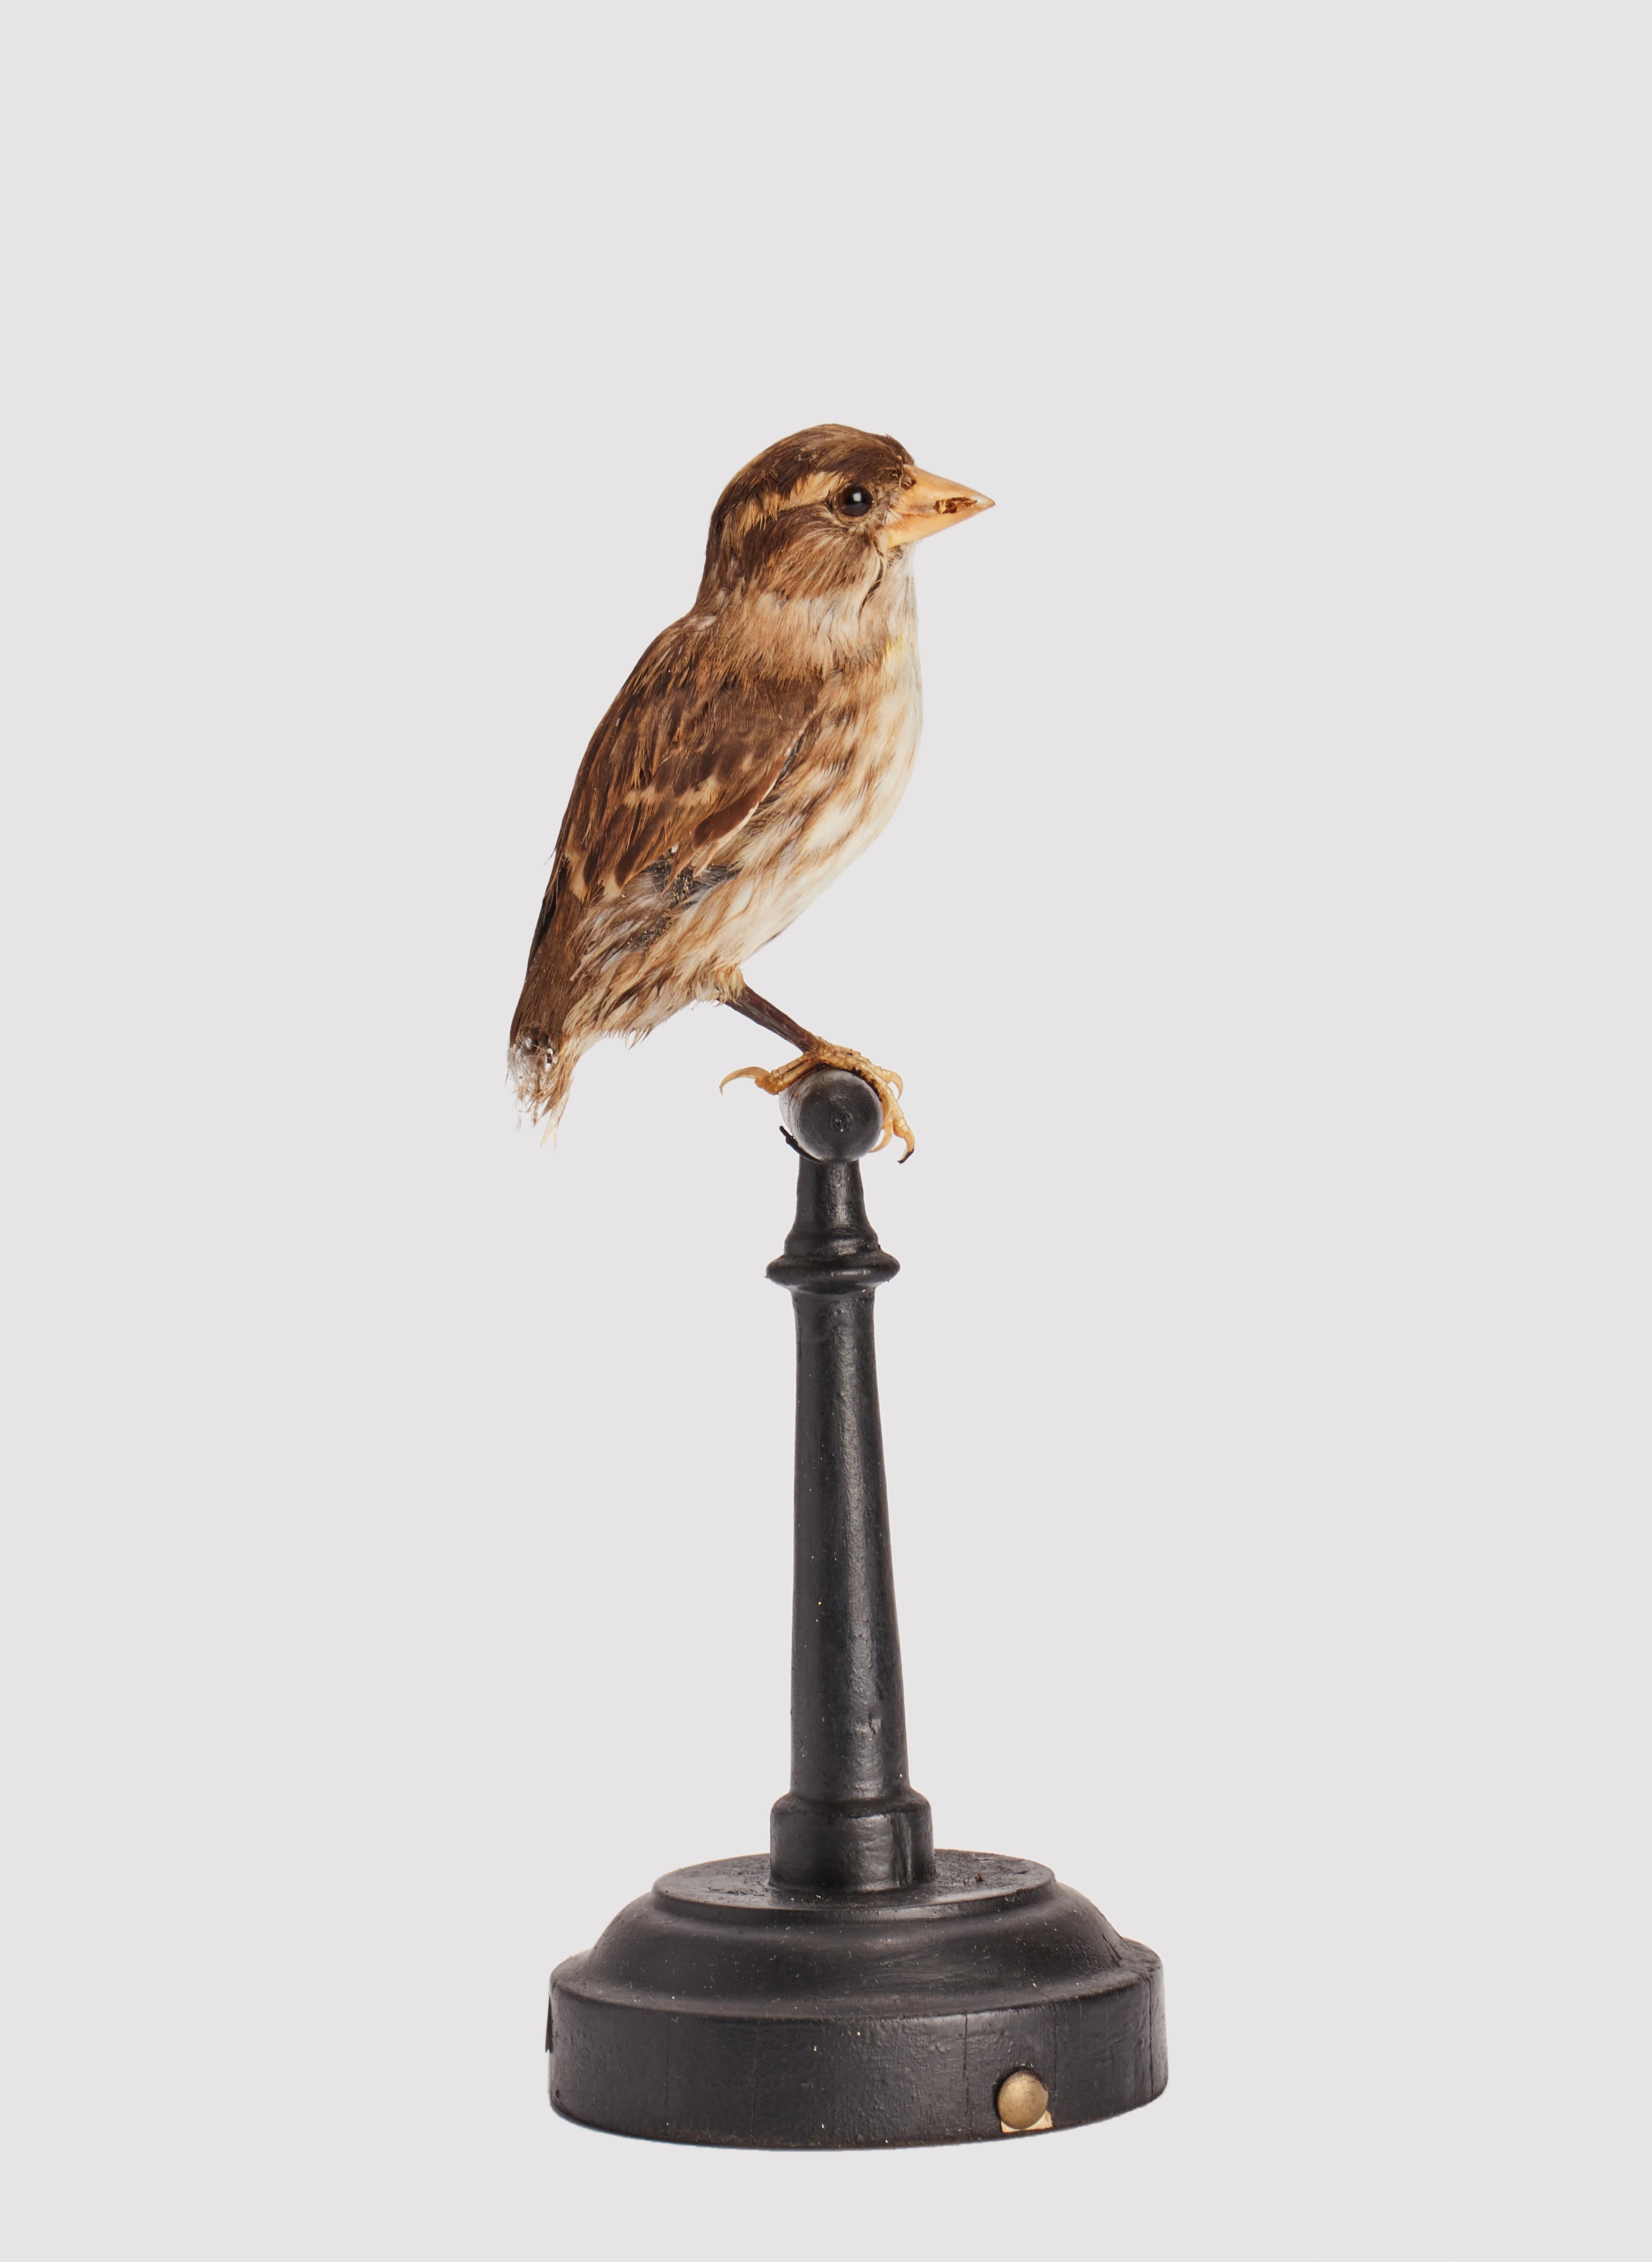 Natural specimen from Wunderkammer Stuffed bird (Passer domesticus) House sparrow on a wooden base with cartouche Specimen for laboratory and Natural history cabinet. S. Brogi Naturalista. Siena, Italy circa 1880.